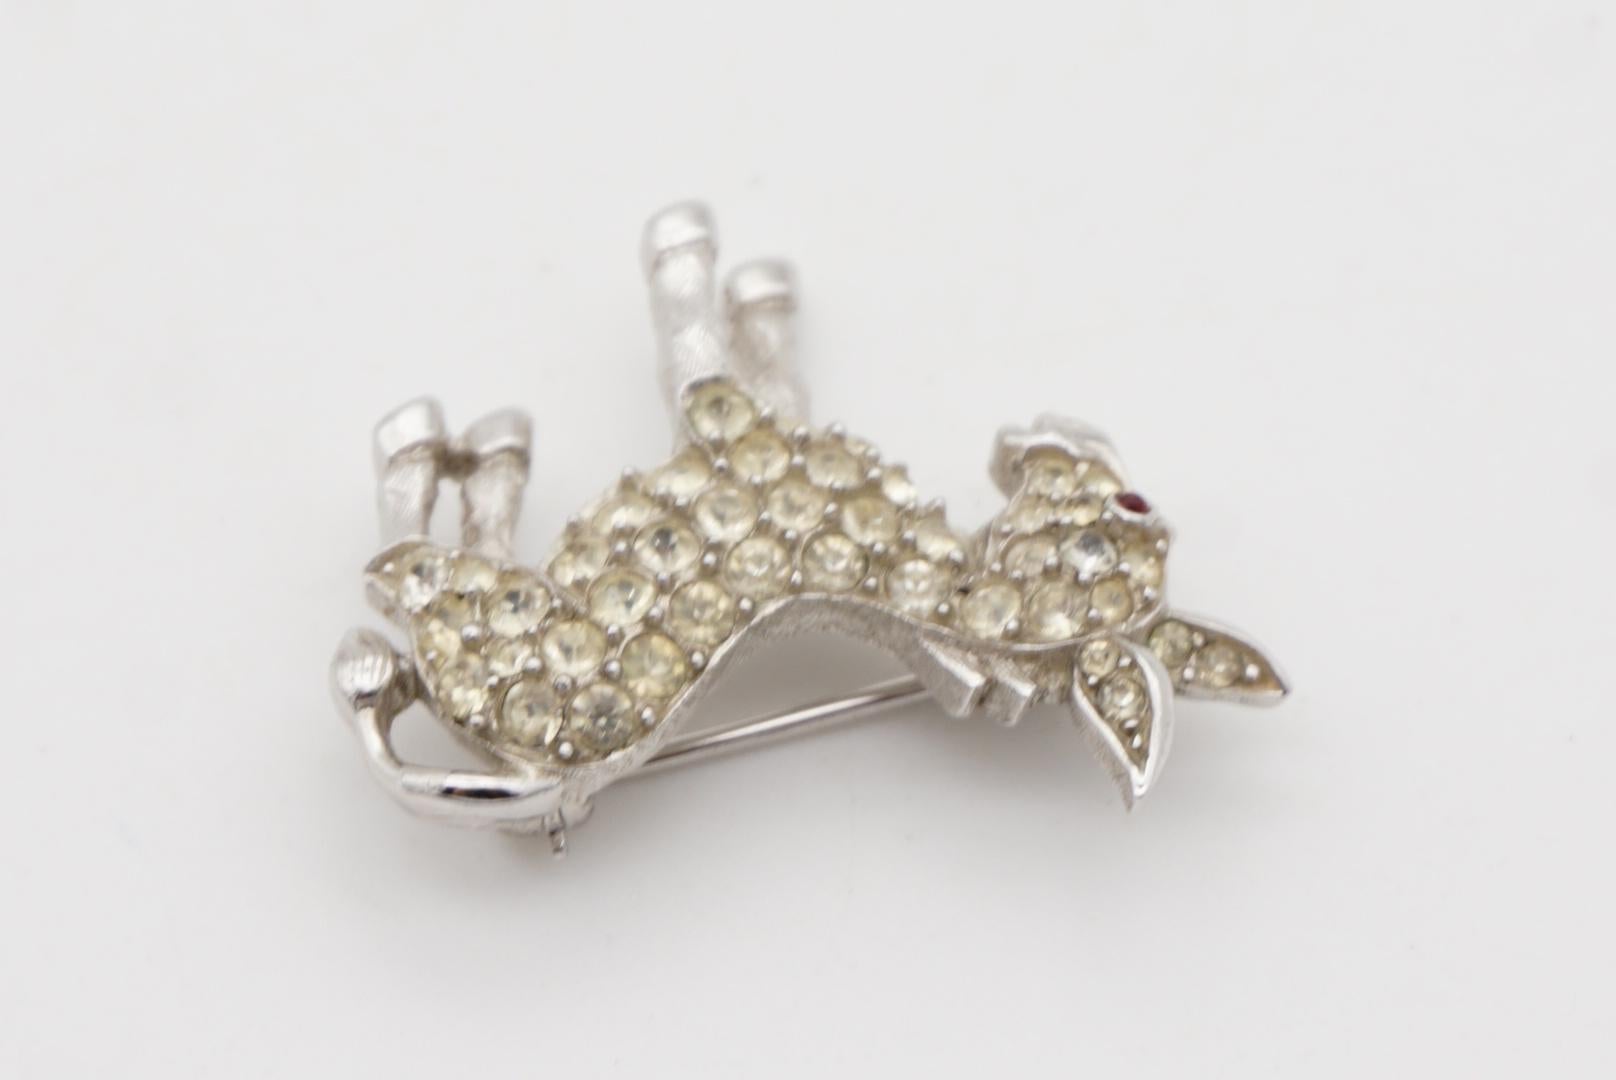 Crown Trifari 1950s Vivid Cute Donkey Red Eye Whole White Crystals Silver Brooch For Sale 2